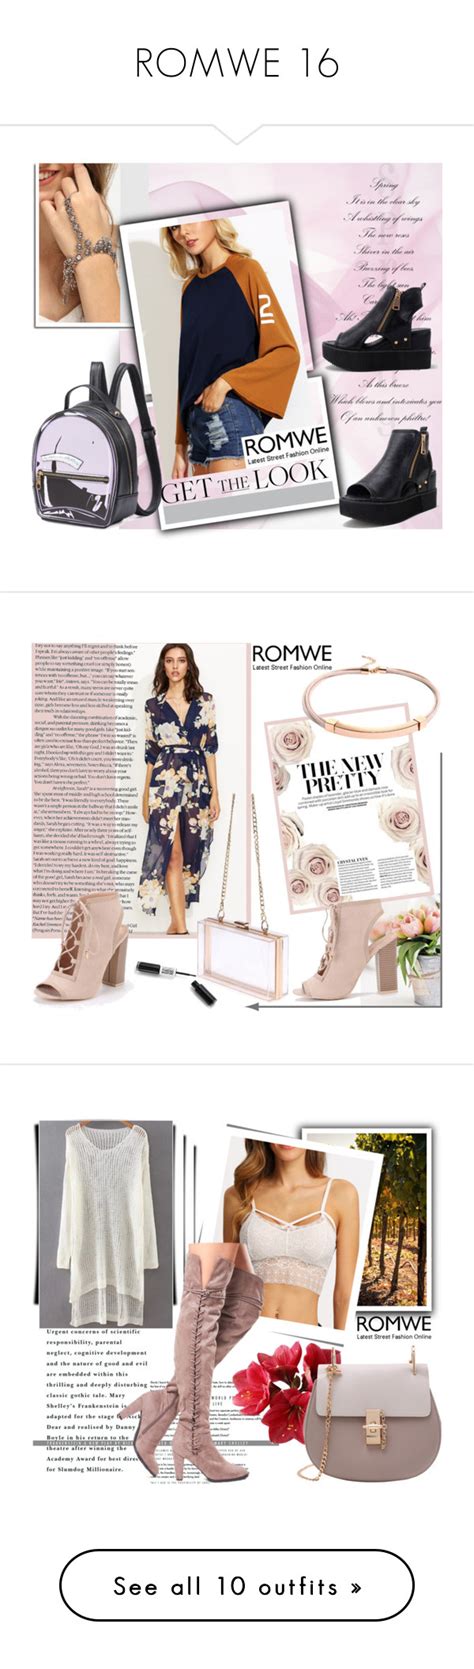 romwe   melissa   polyvore featuring vintage  pottery barn clothes design